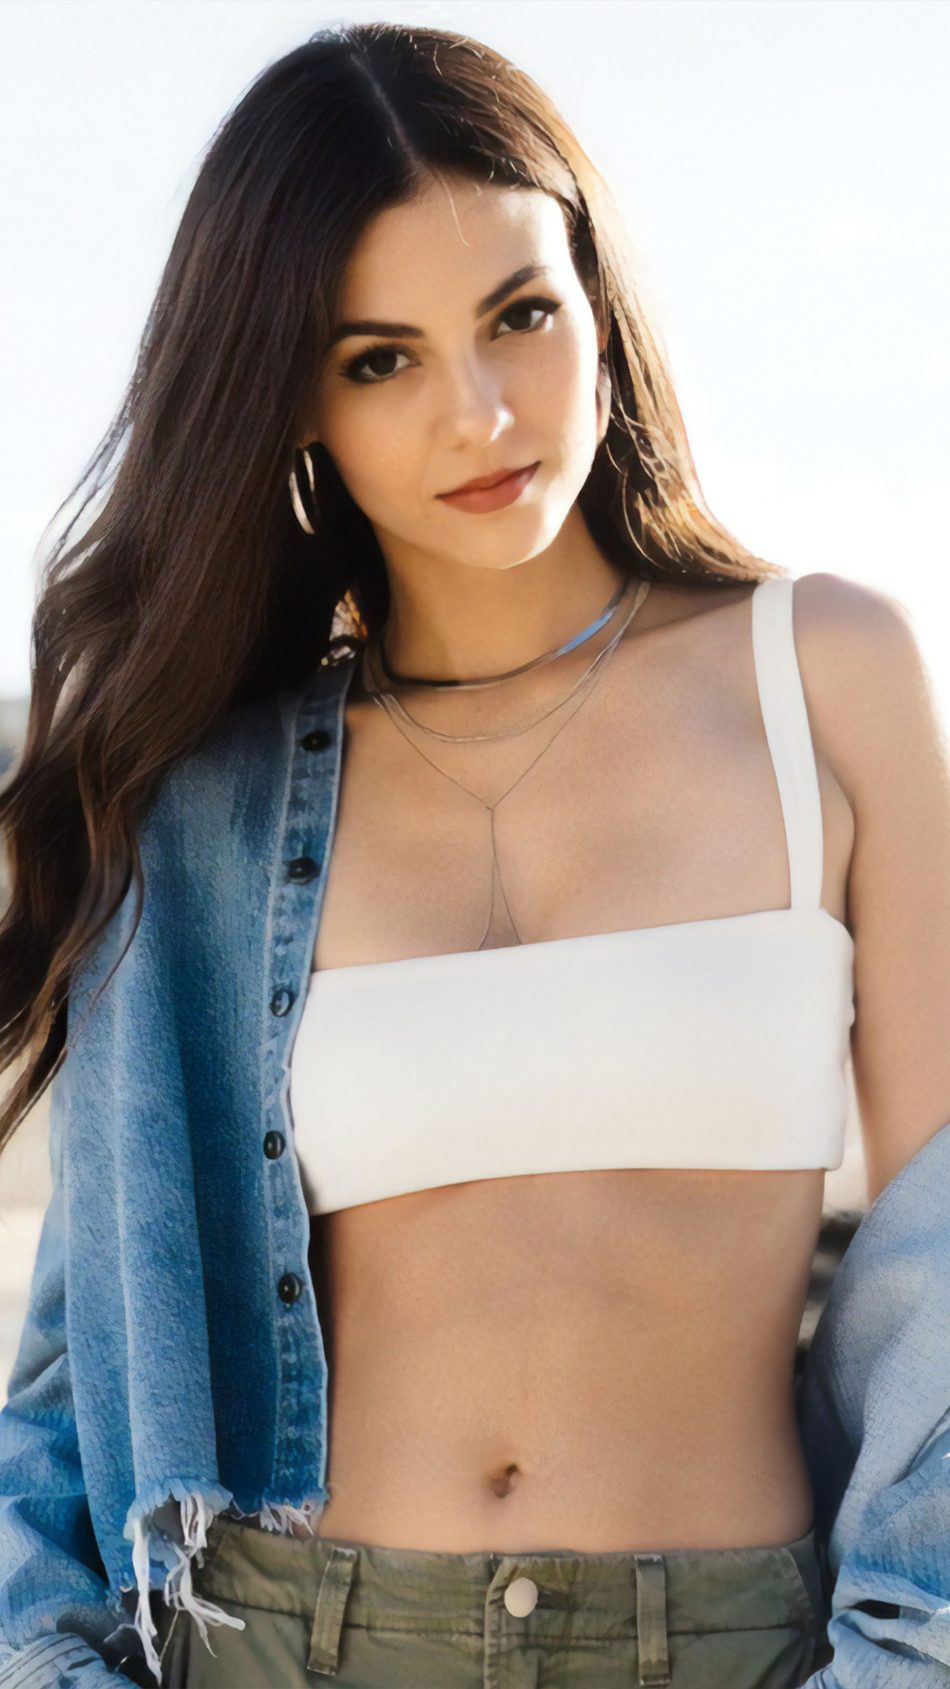 Gorgeous Victoria Justice Photoshoot 2019 4K Ultra HD Mobile Wallpaper